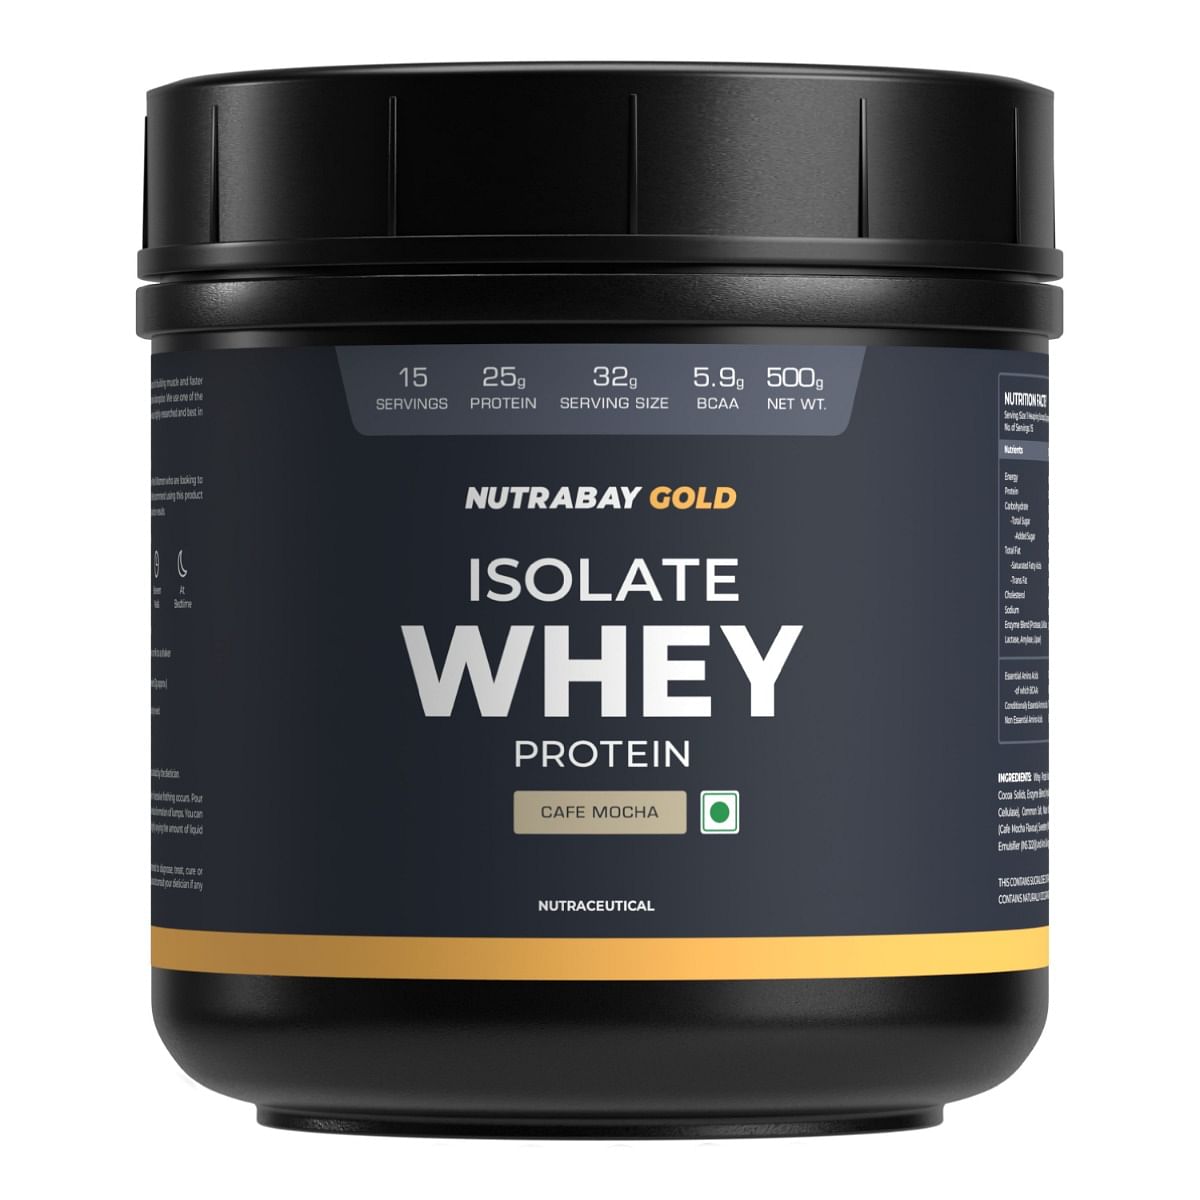 Nutrabay Gold 100 Whey Protein Isolate with Digestive Enzymes - 25g Protein  Protein Powder for Muscle Support  Recovery - Caf Mocha 500g